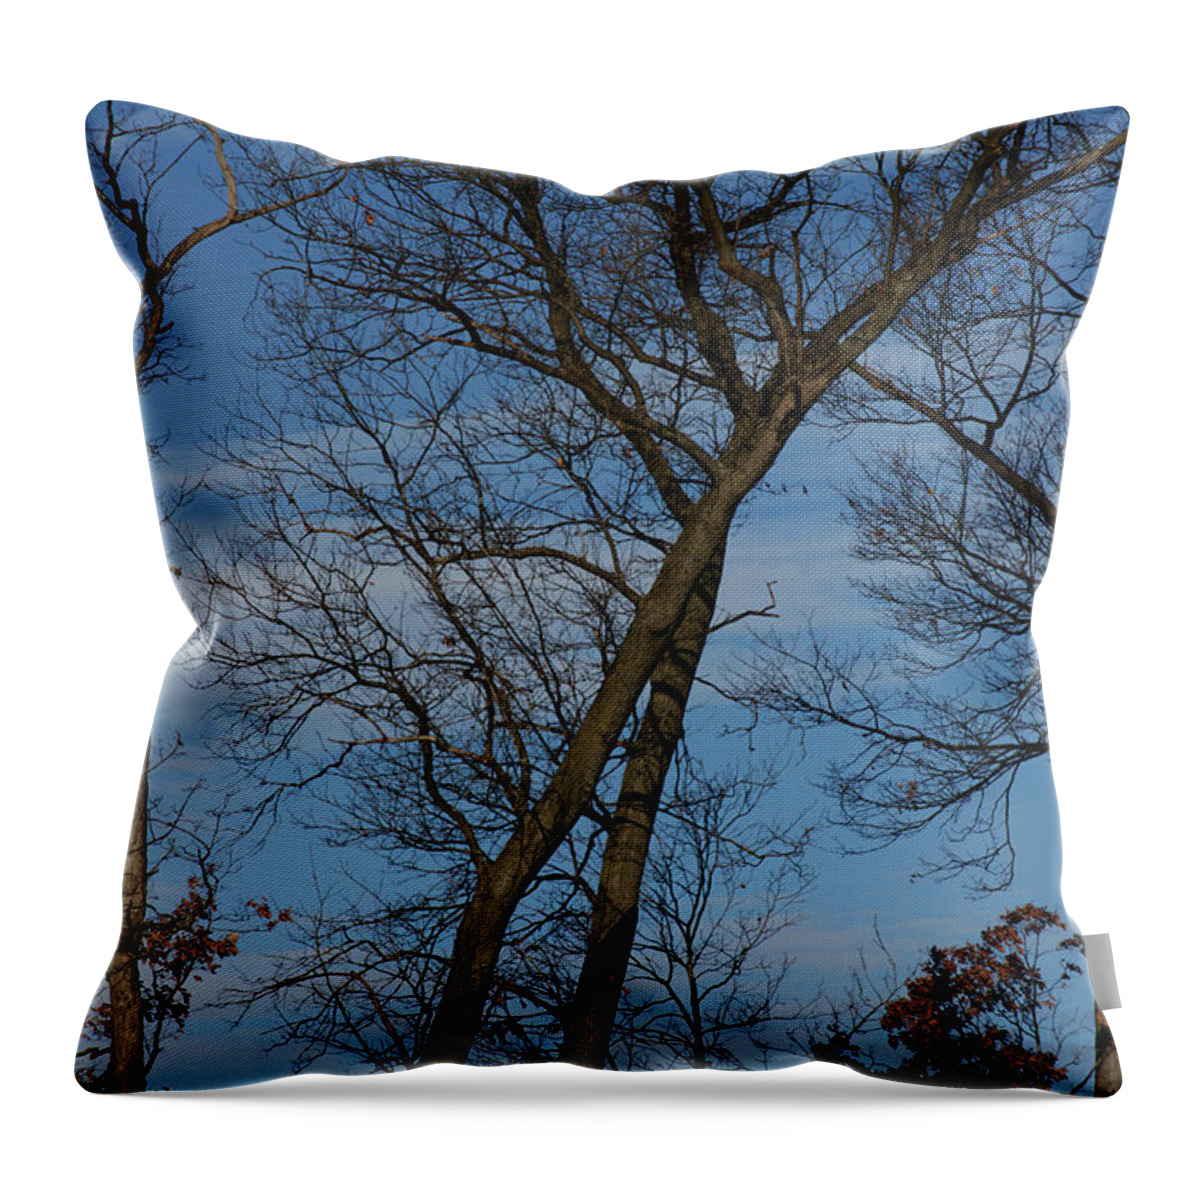 Woodland Throw Pillow featuring the photograph Framed In Oak - 2 by Linda Shafer